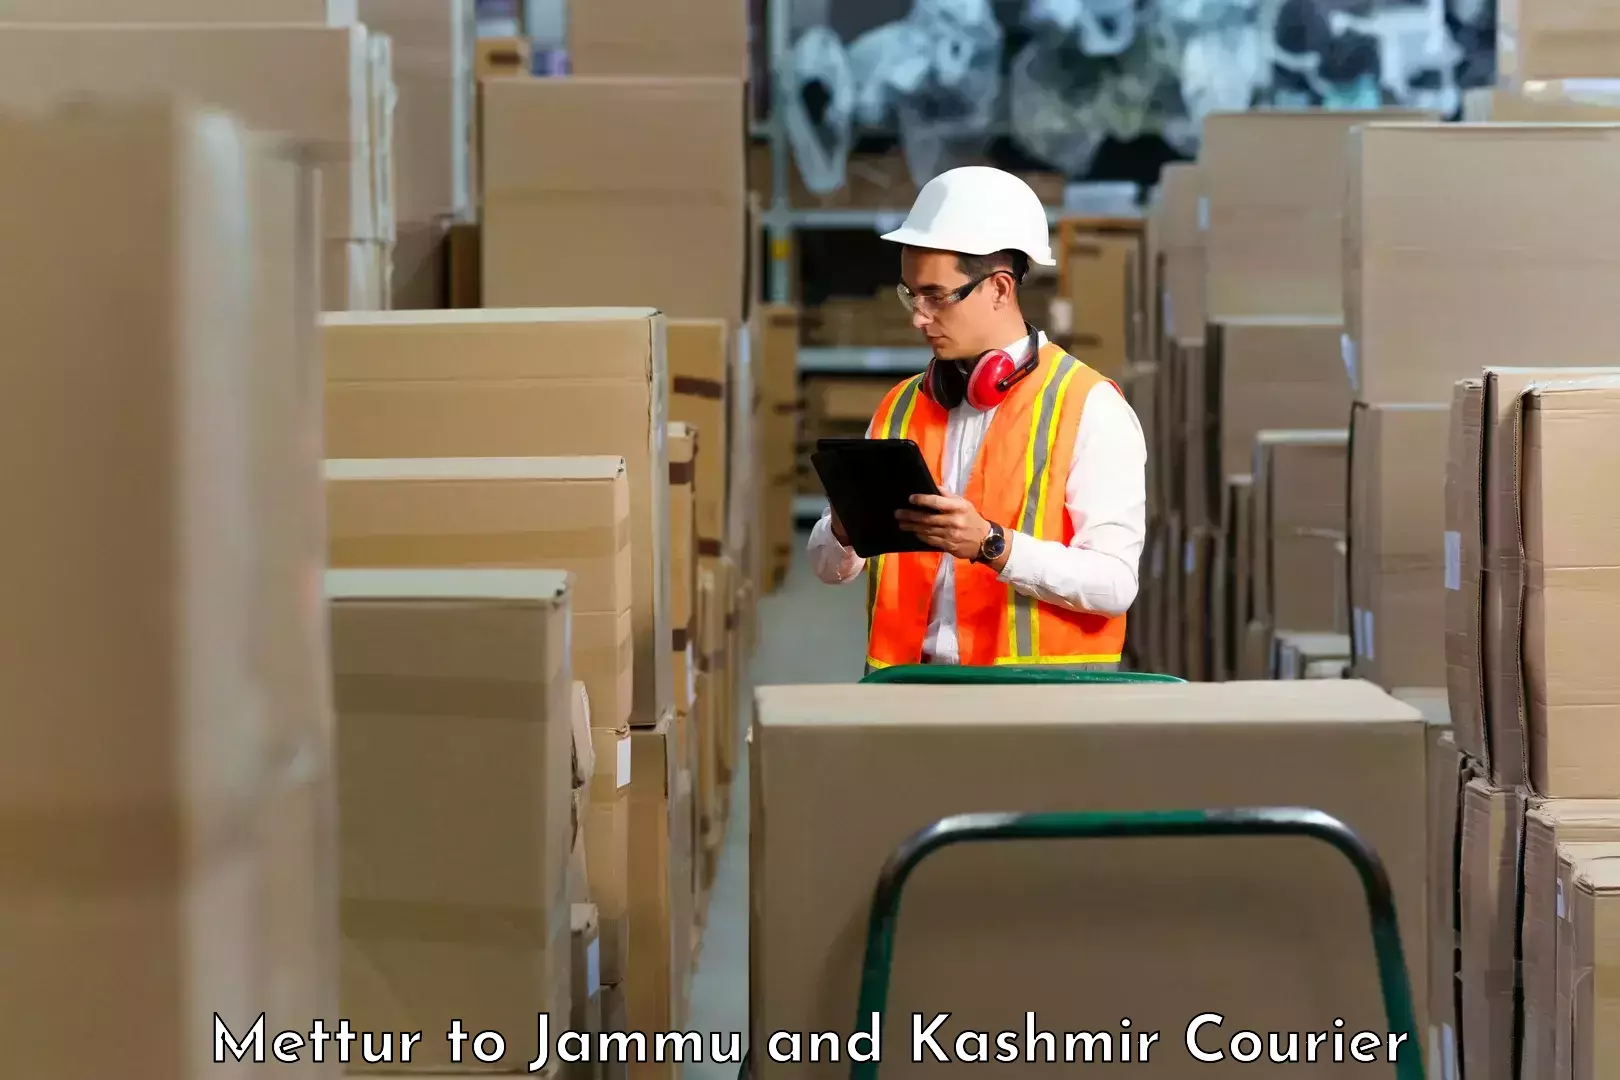 Seamless shipping experience Mettur to Jammu and Kashmir